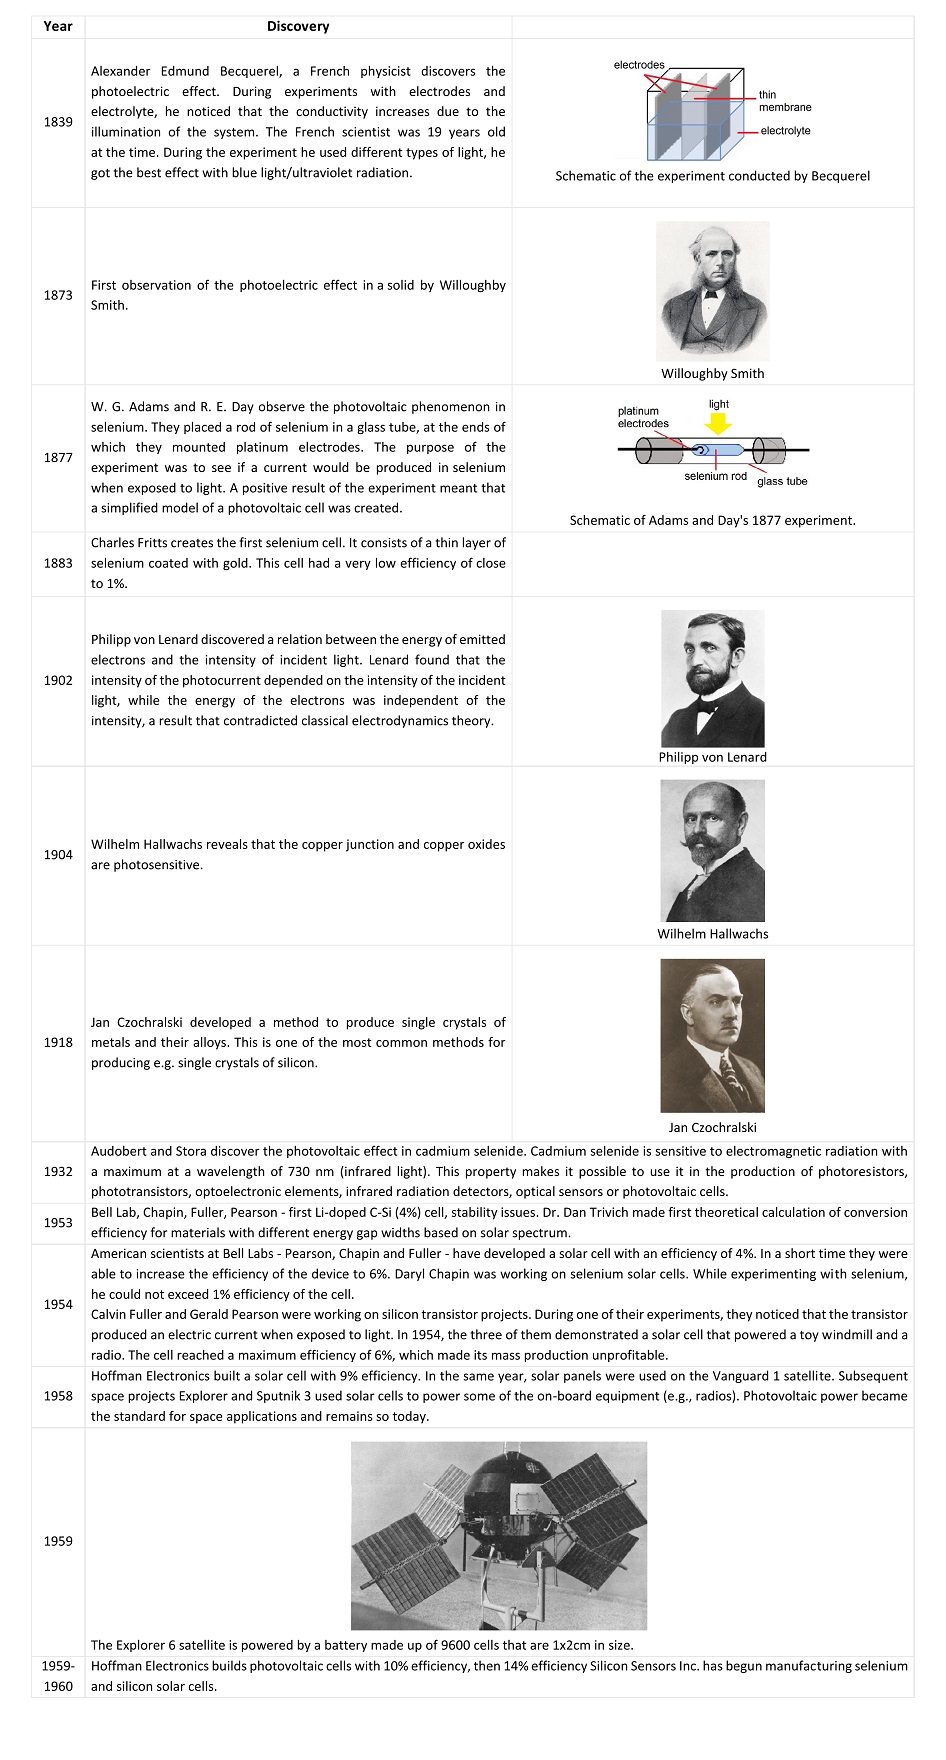 History of achievements in photovoltaic effect research (from 1839 to 1960). Own elaboration.